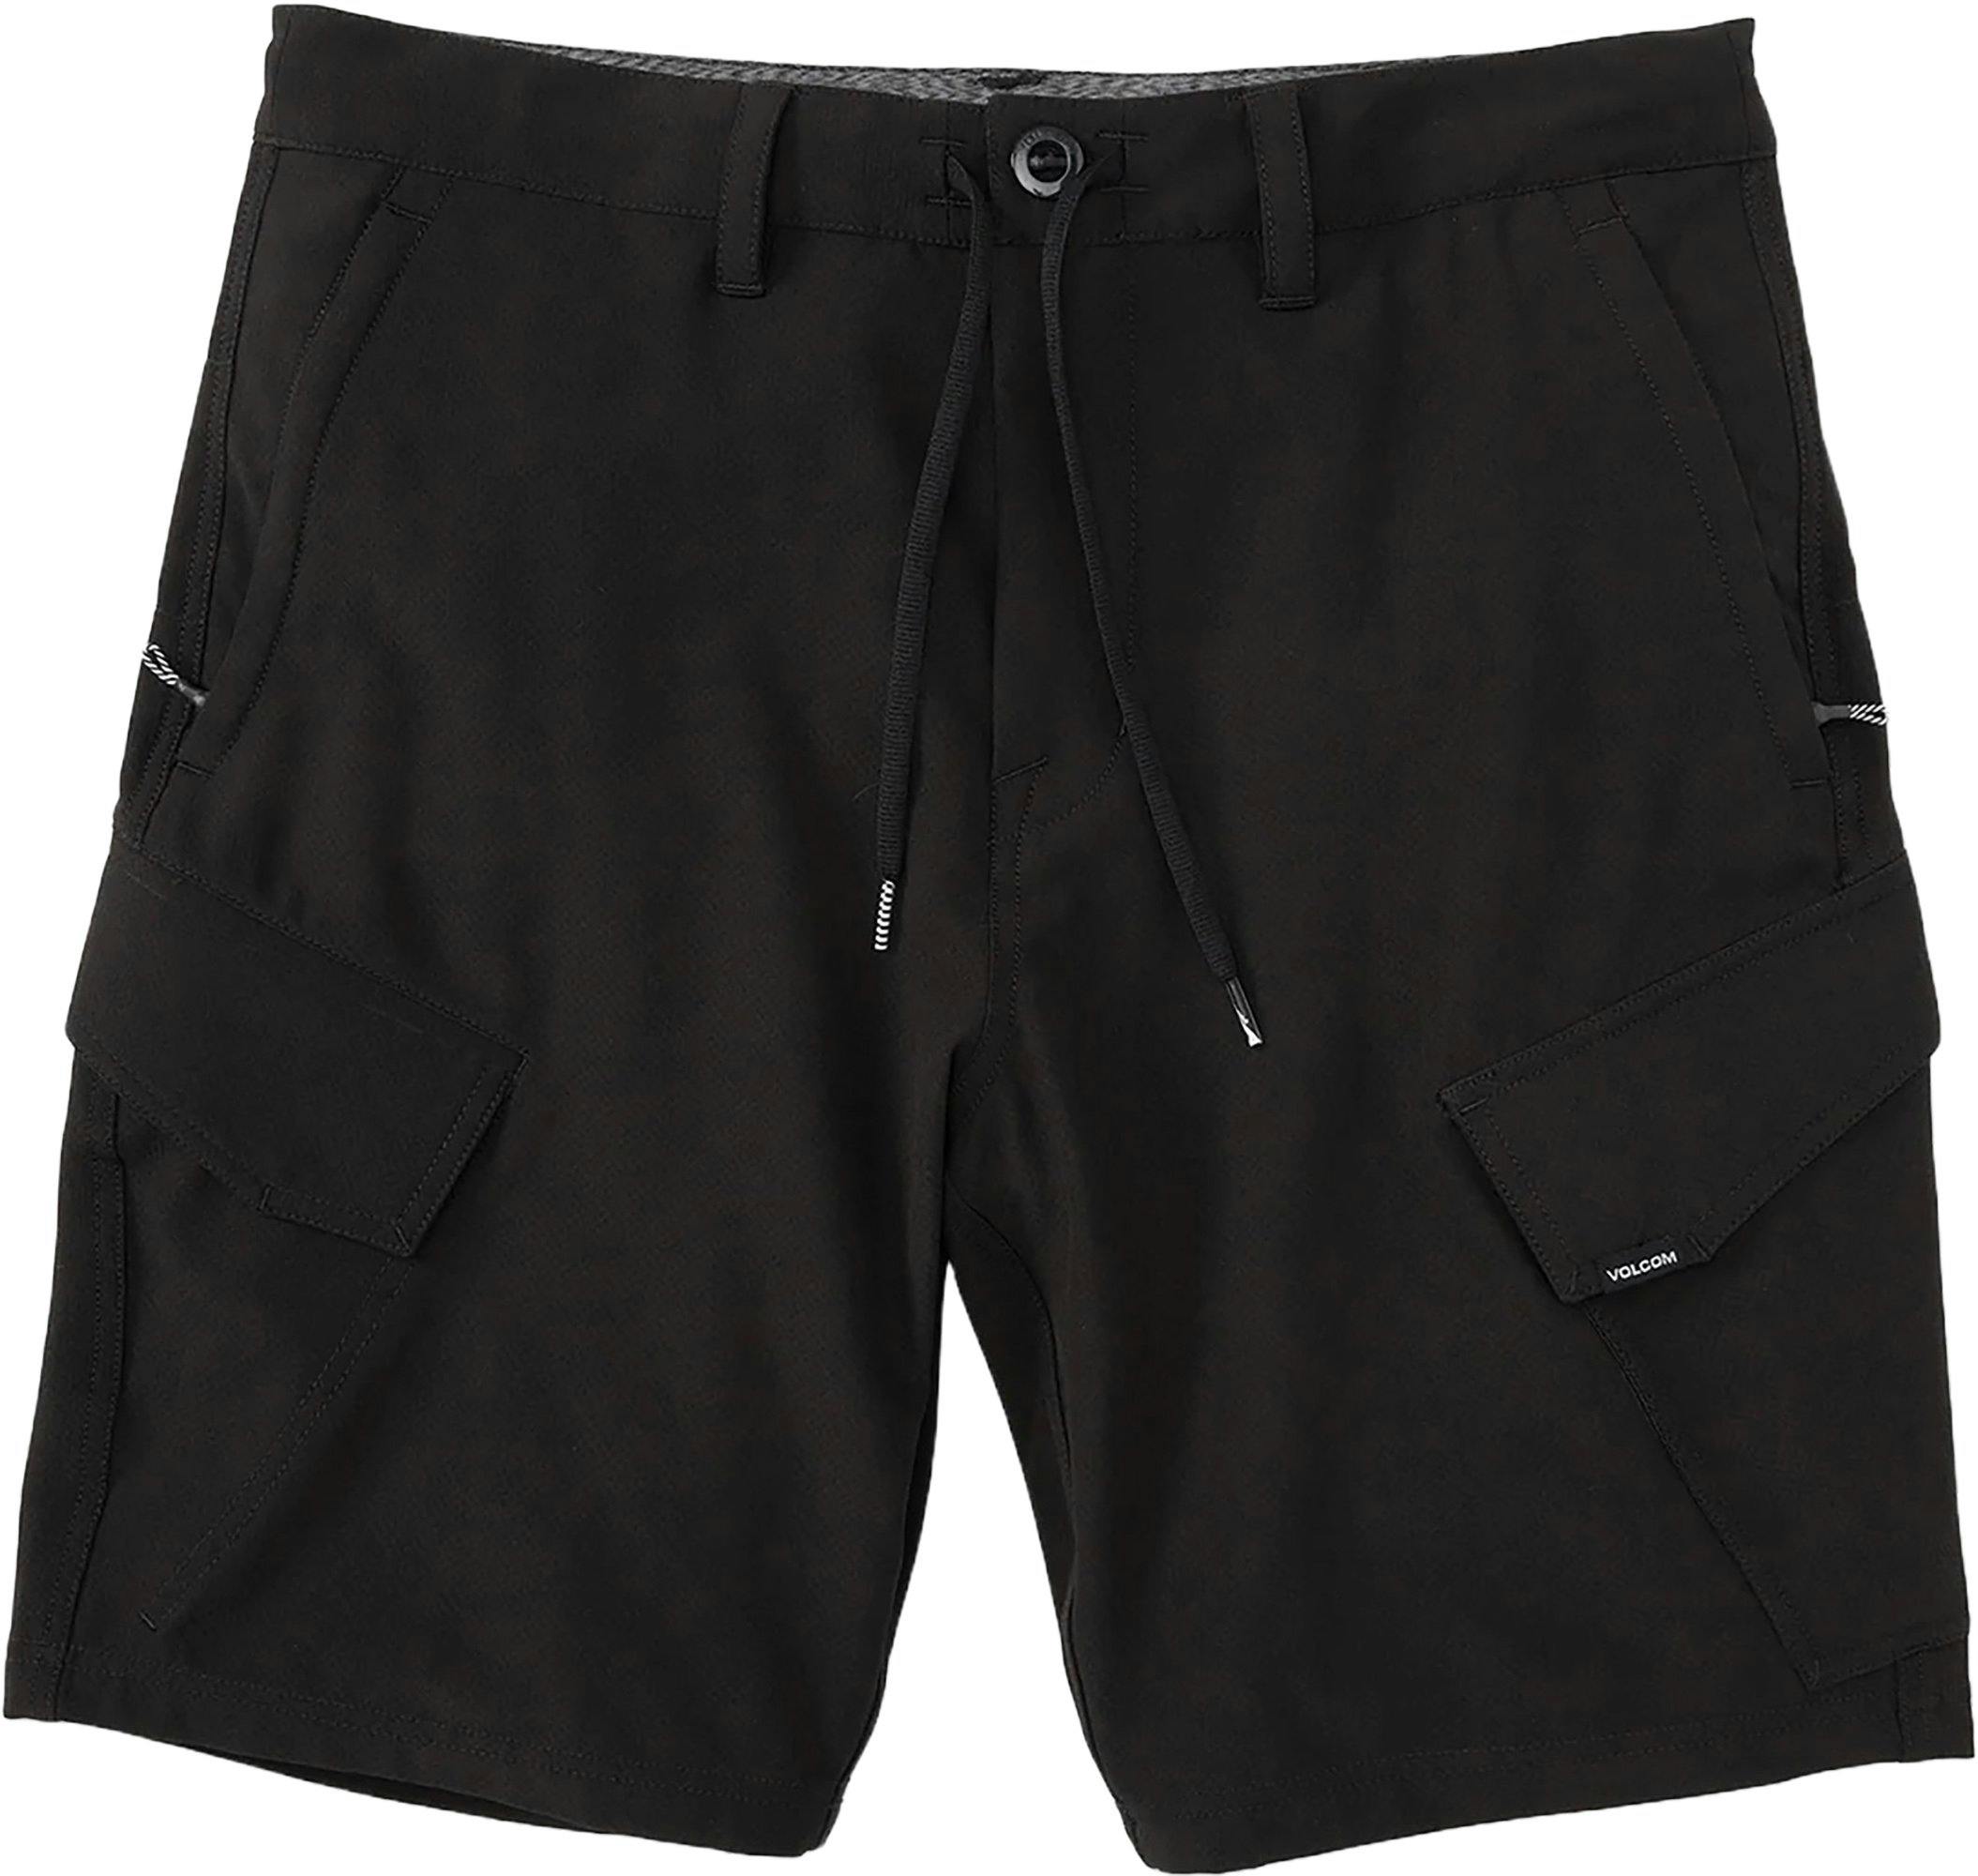 Product image for Country Days Hybrid Short 20" - Men's